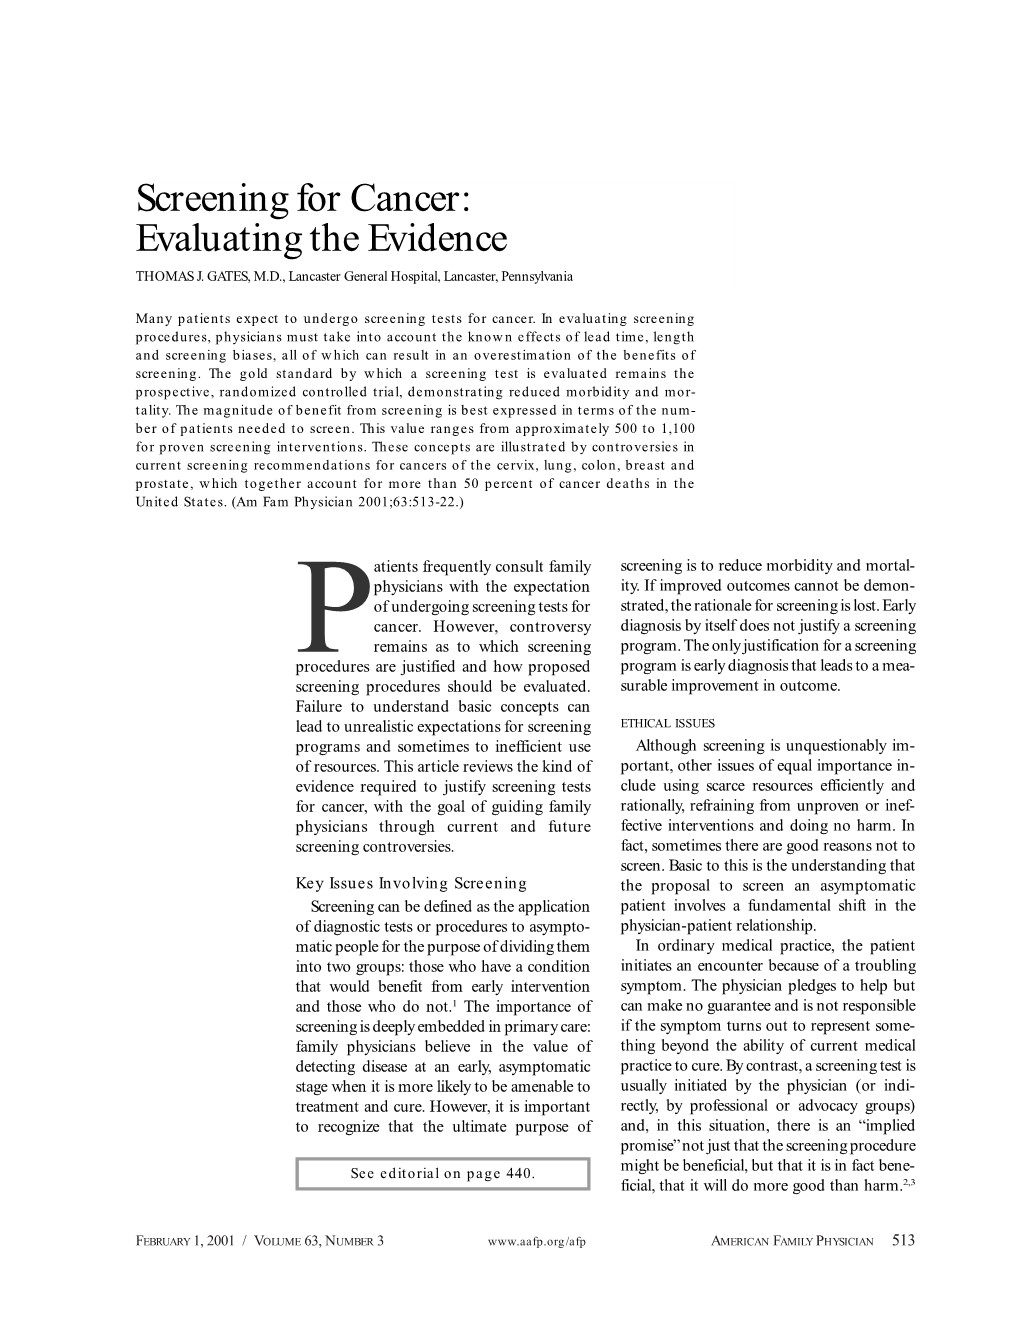 Screening for Cancer: Evaluating the Evidence THOMAS J